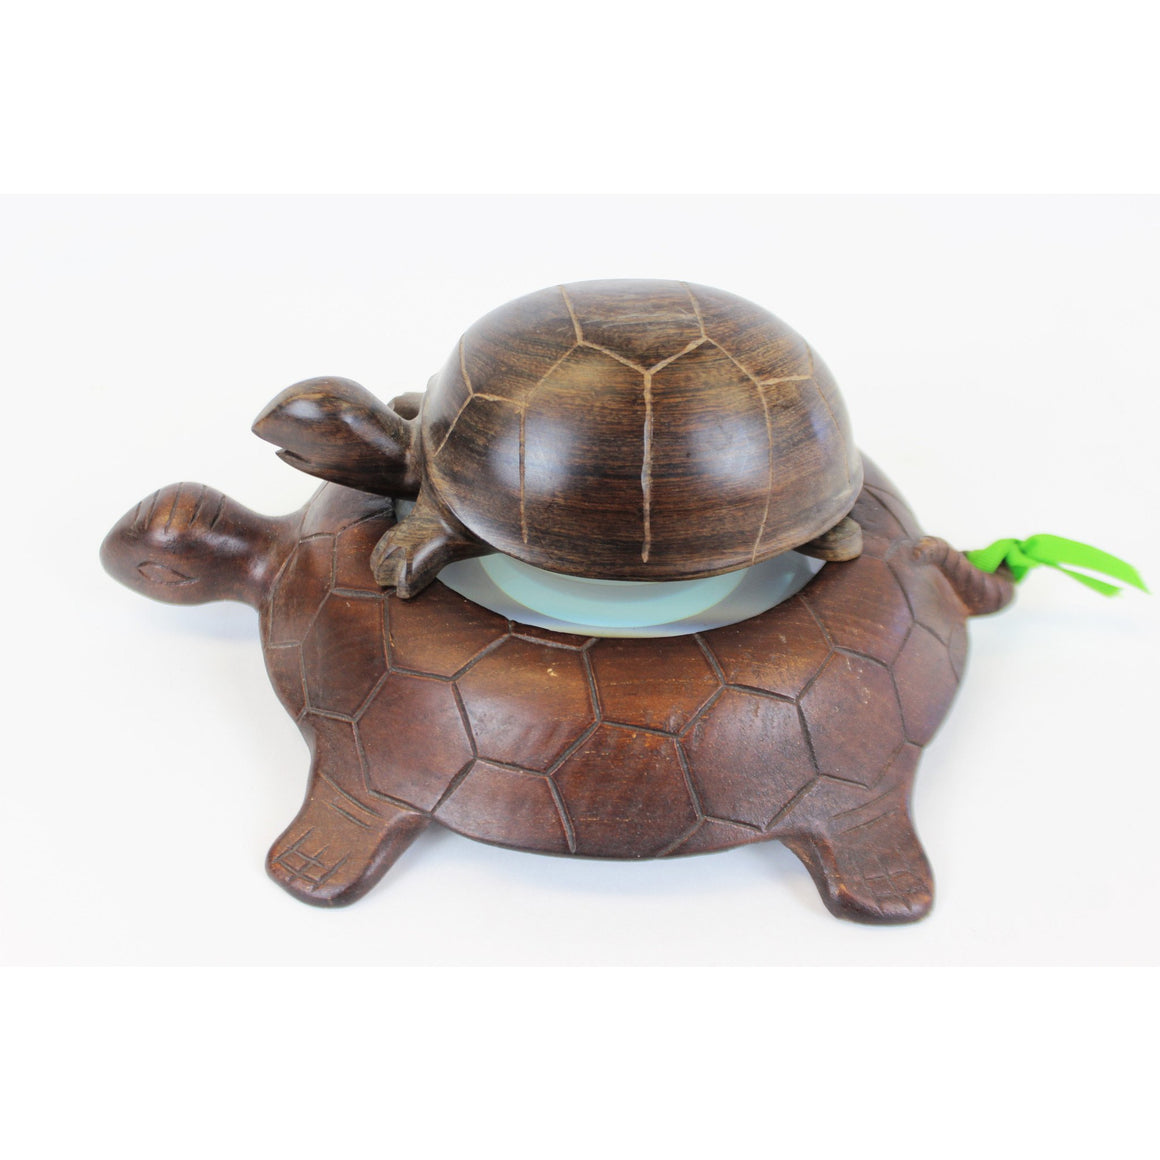 Nesting 2 Turtles w/ Inset Magnifying Glass